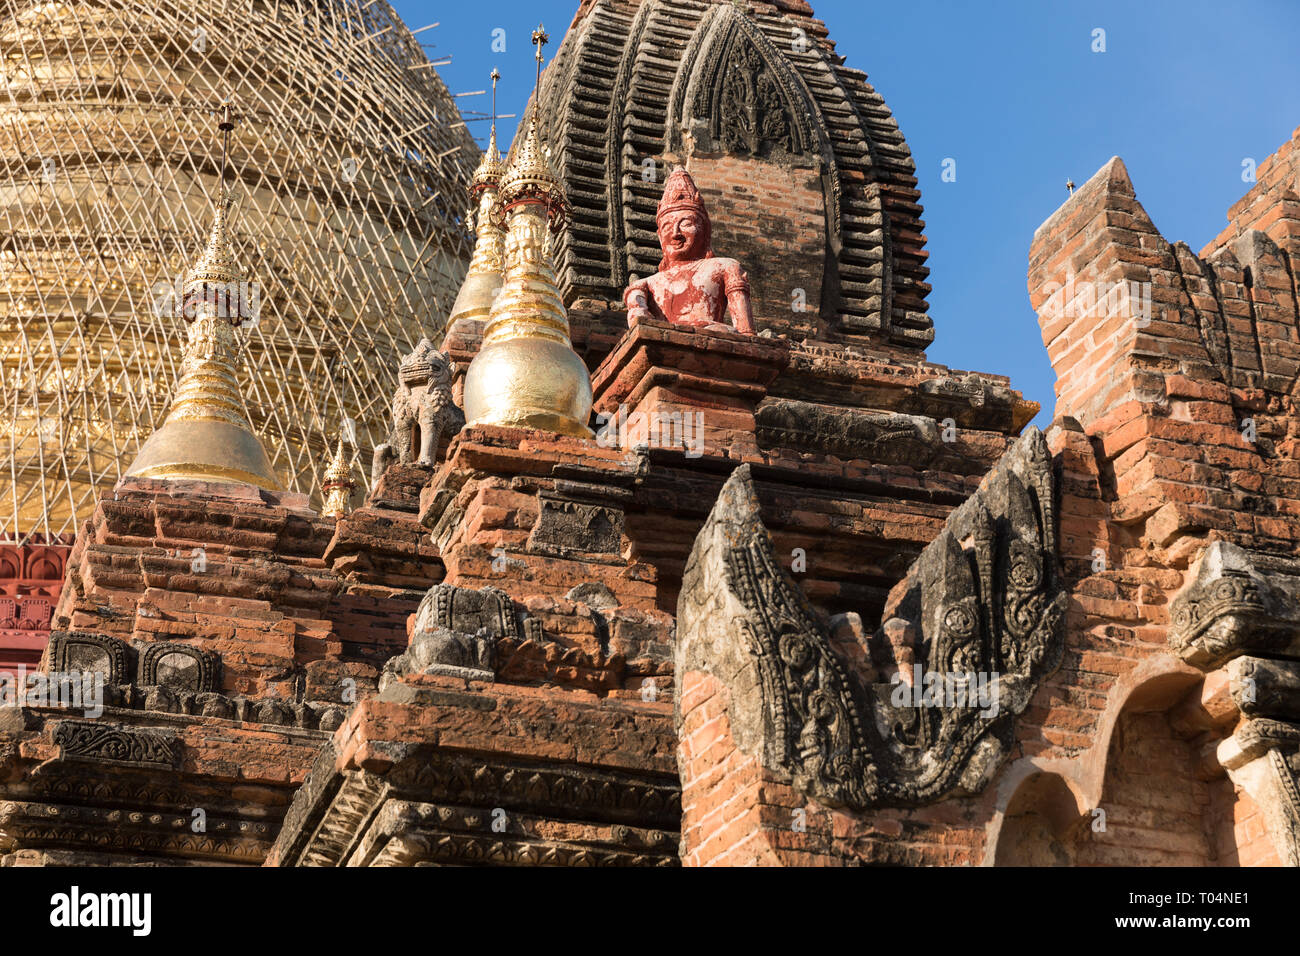 Temples and historical pagodas of the Archaeological Zone in Bagan in the early morning sunlight. Myanmar (Burma). Stock Photo